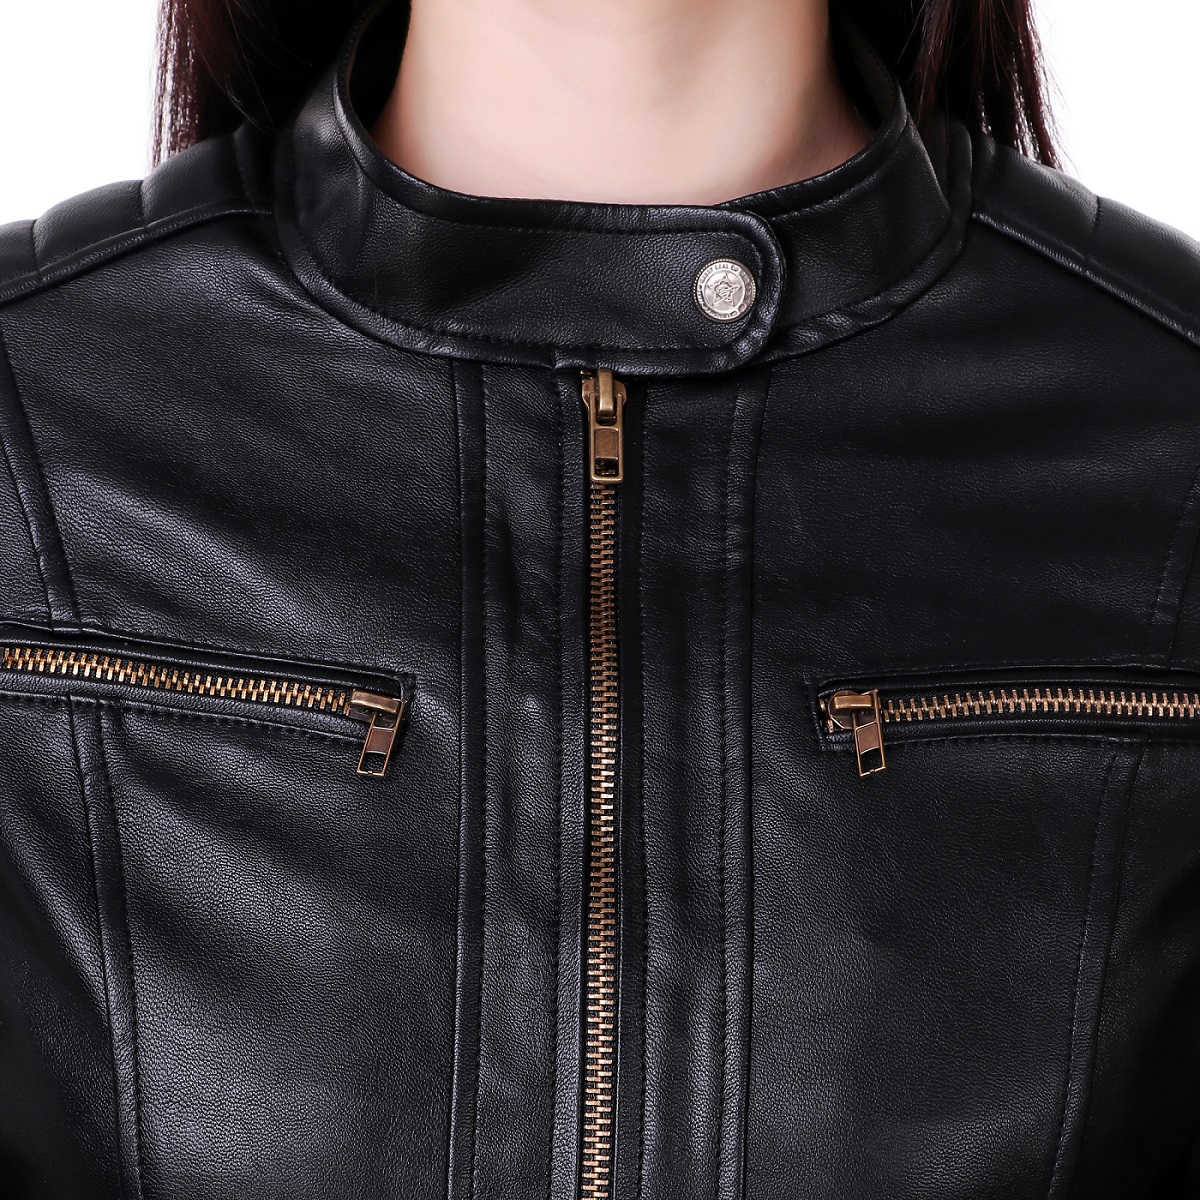 Buy Leather Retail Black Faux leather Jacket For Woman Online @ ₹1999 ...